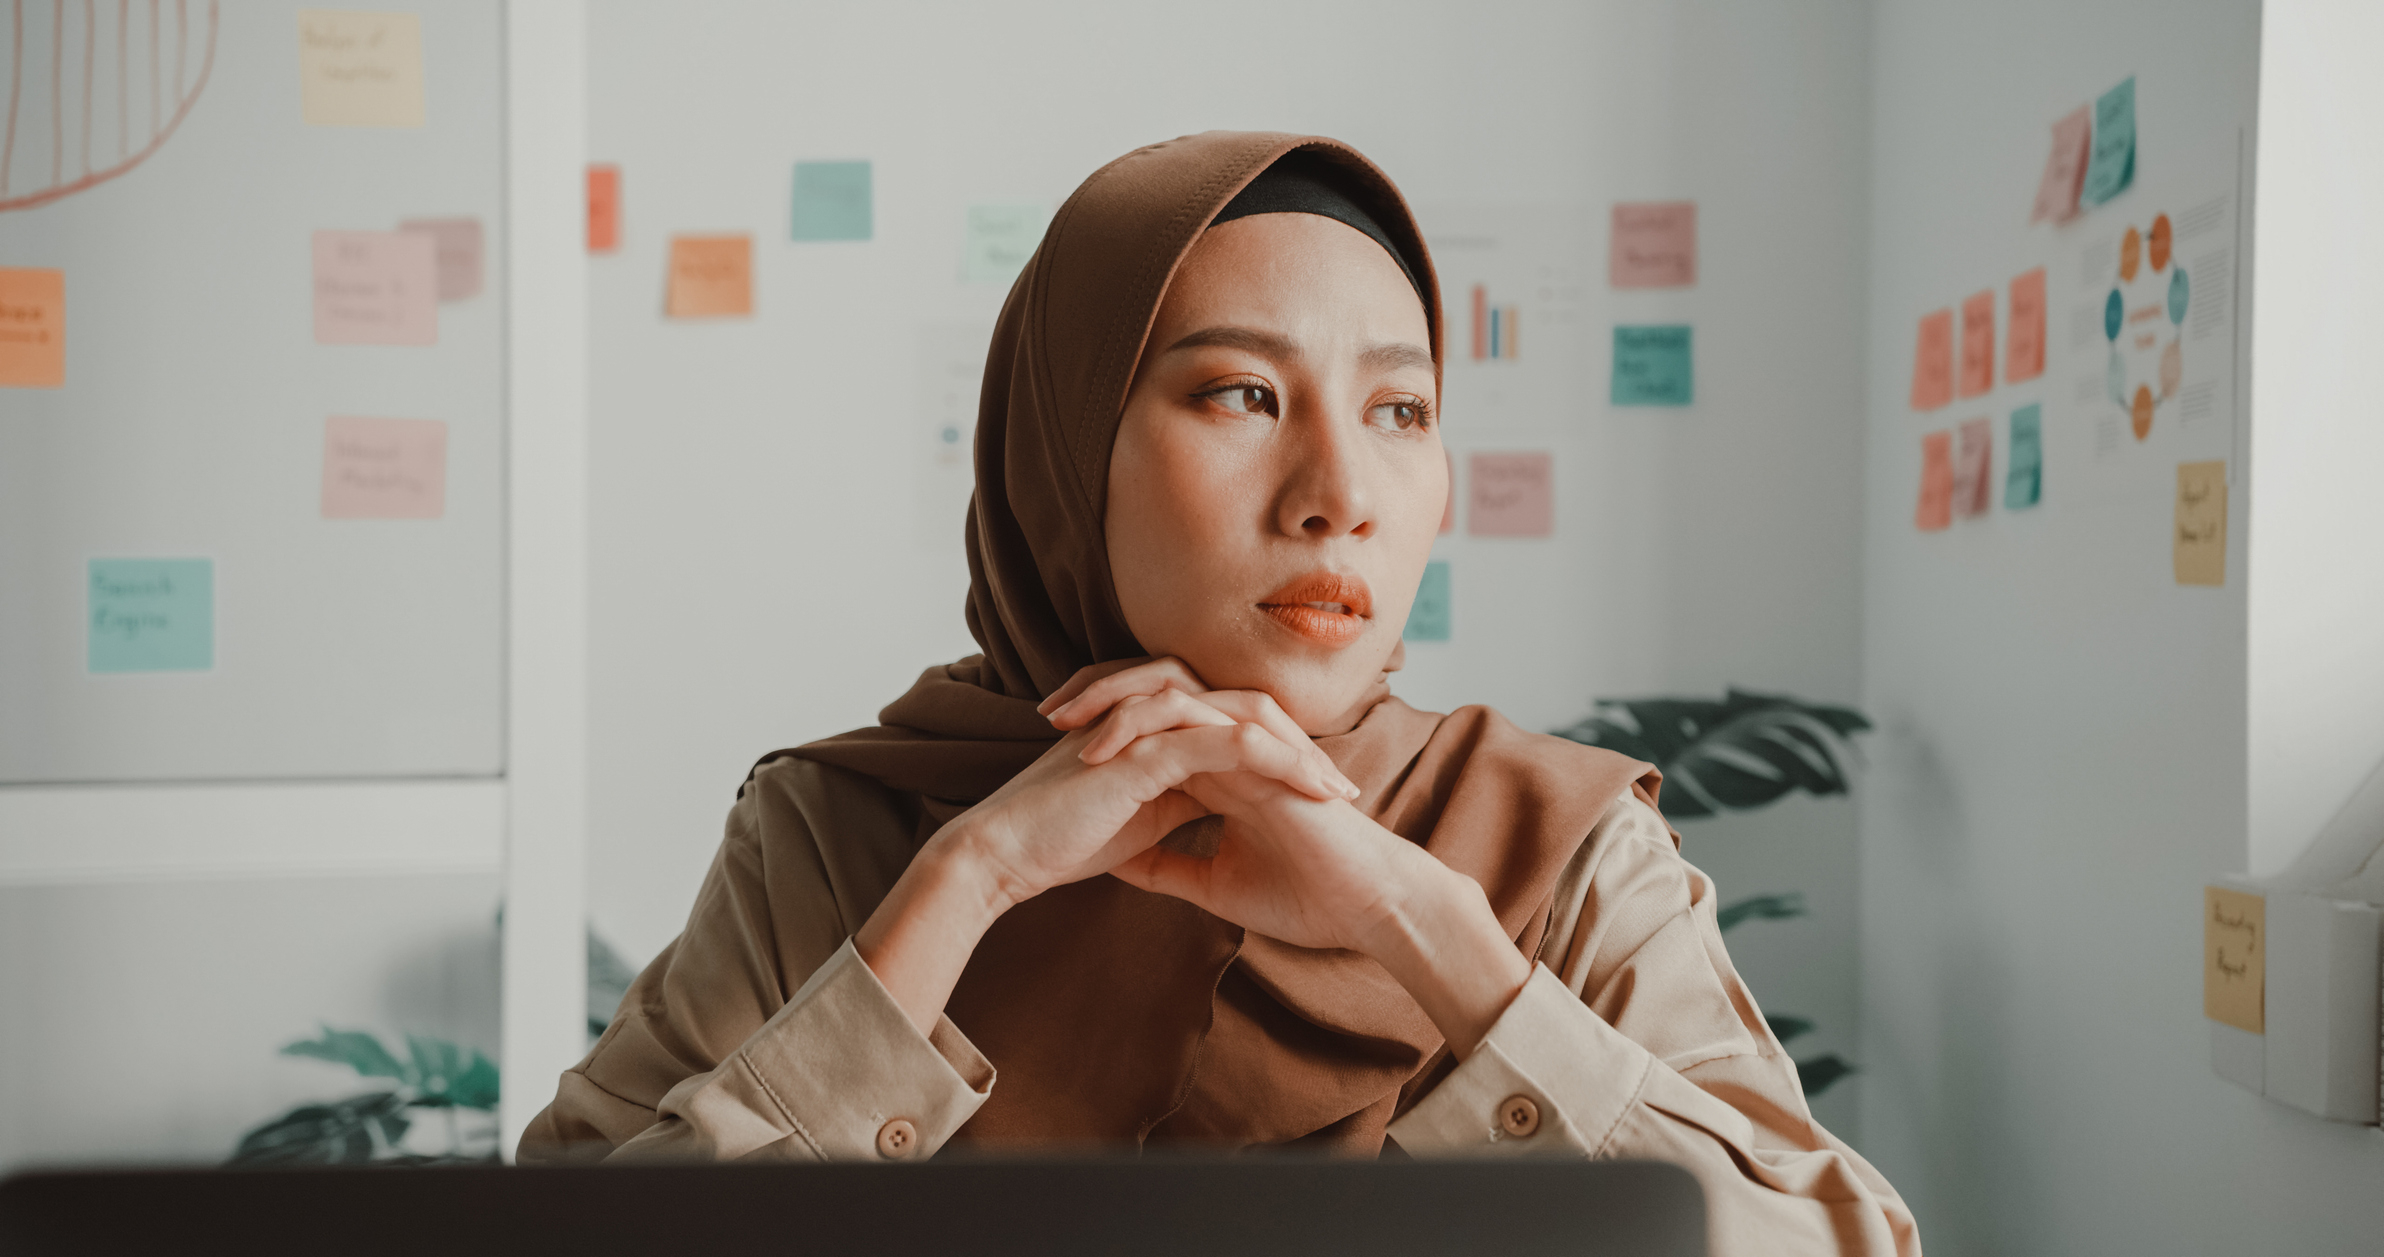 Woman in hijab looking contemplative at desk with sticky notes in background